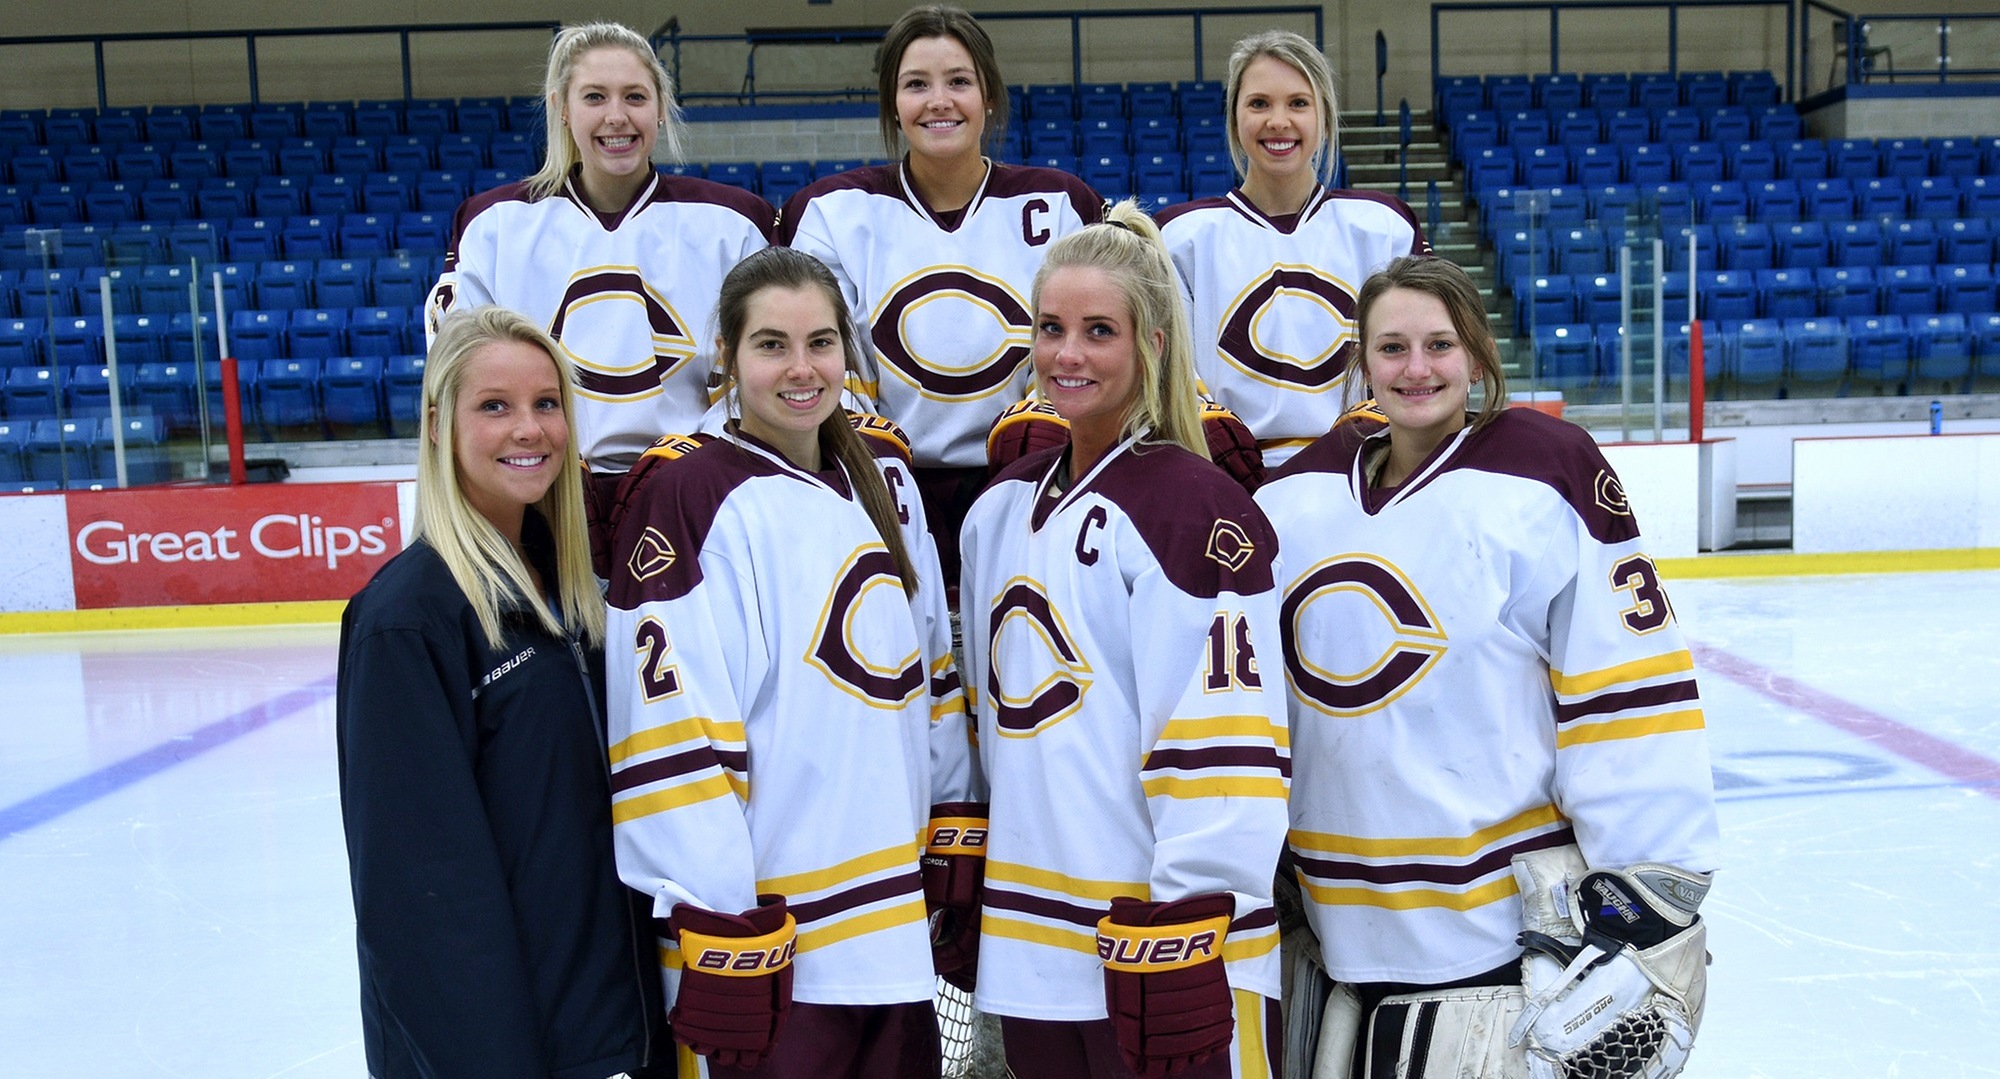 The Cobber seniors and their parents were honored before the last game of the season.